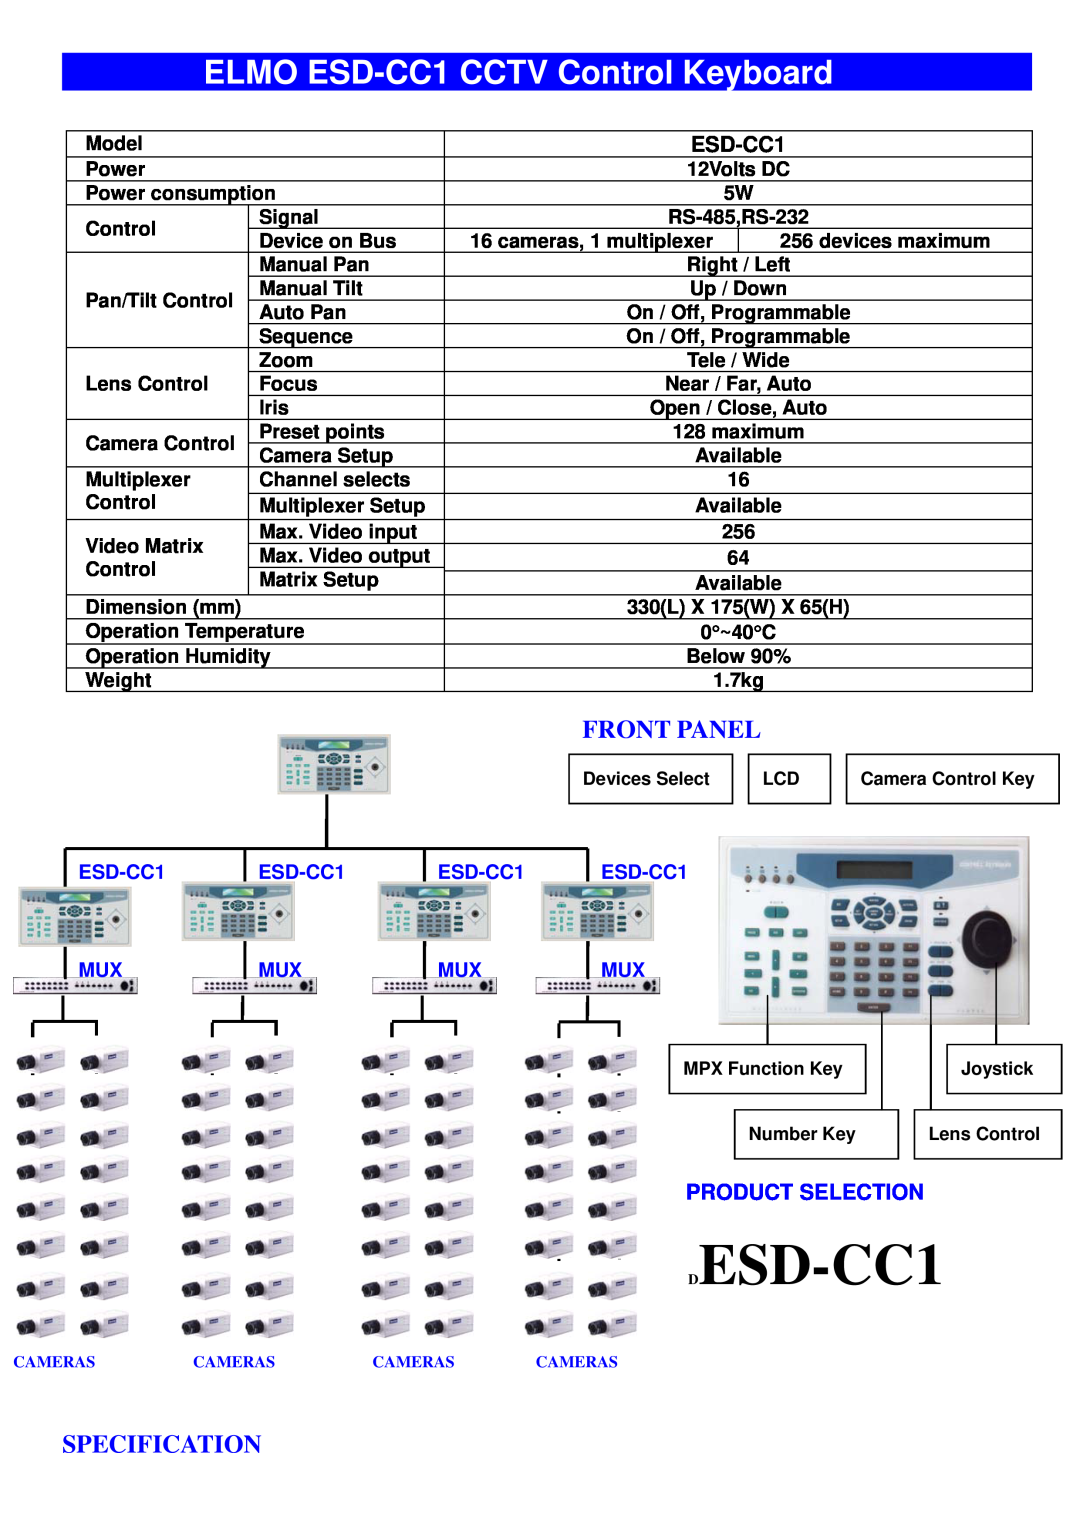 Elmo manual Product Selection, DESD-CC1, ELMO ESD-CC1CCTV Control Keyboard, Front Panel, Specification 